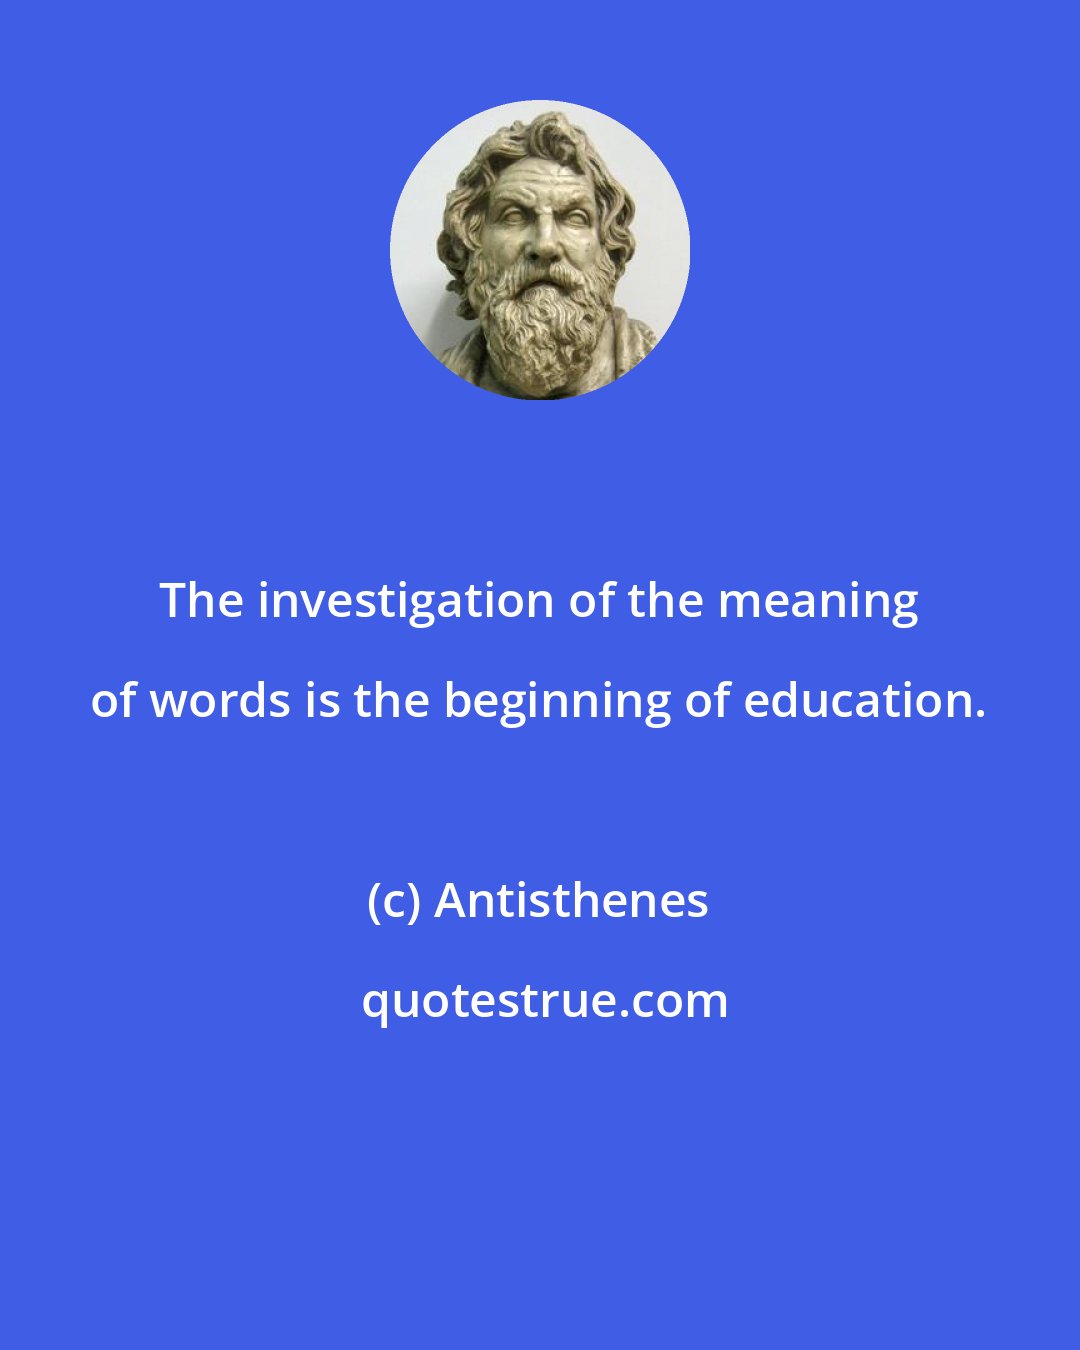 Antisthenes: The investigation of the meaning of words is the beginning of education.